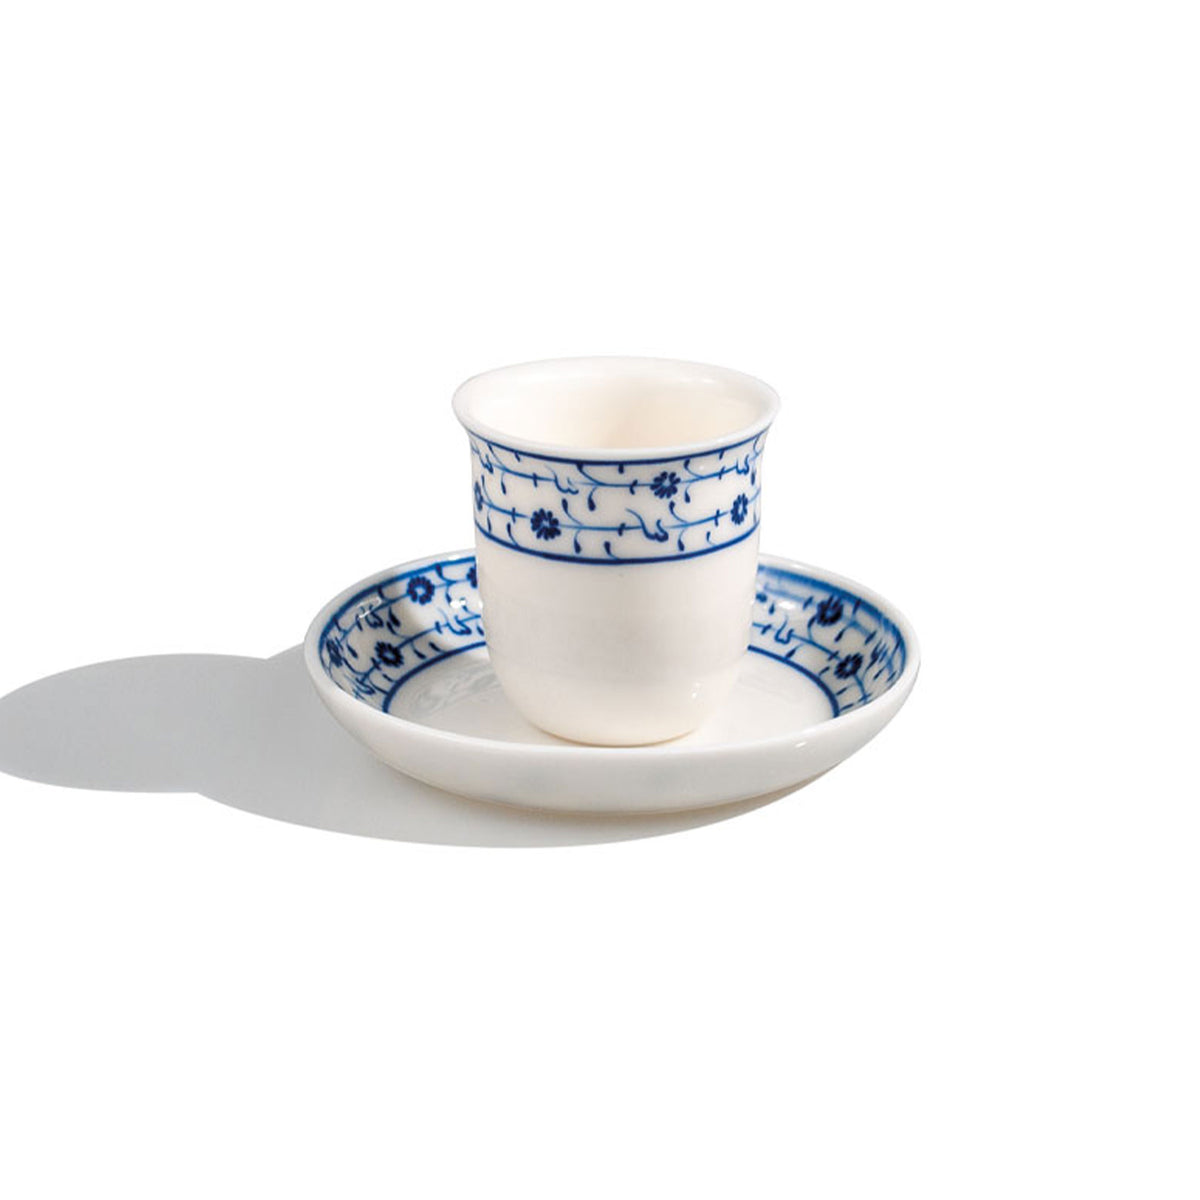 Golden horn pattern blue-white transparent turkish coffee porcelain cup and plate.